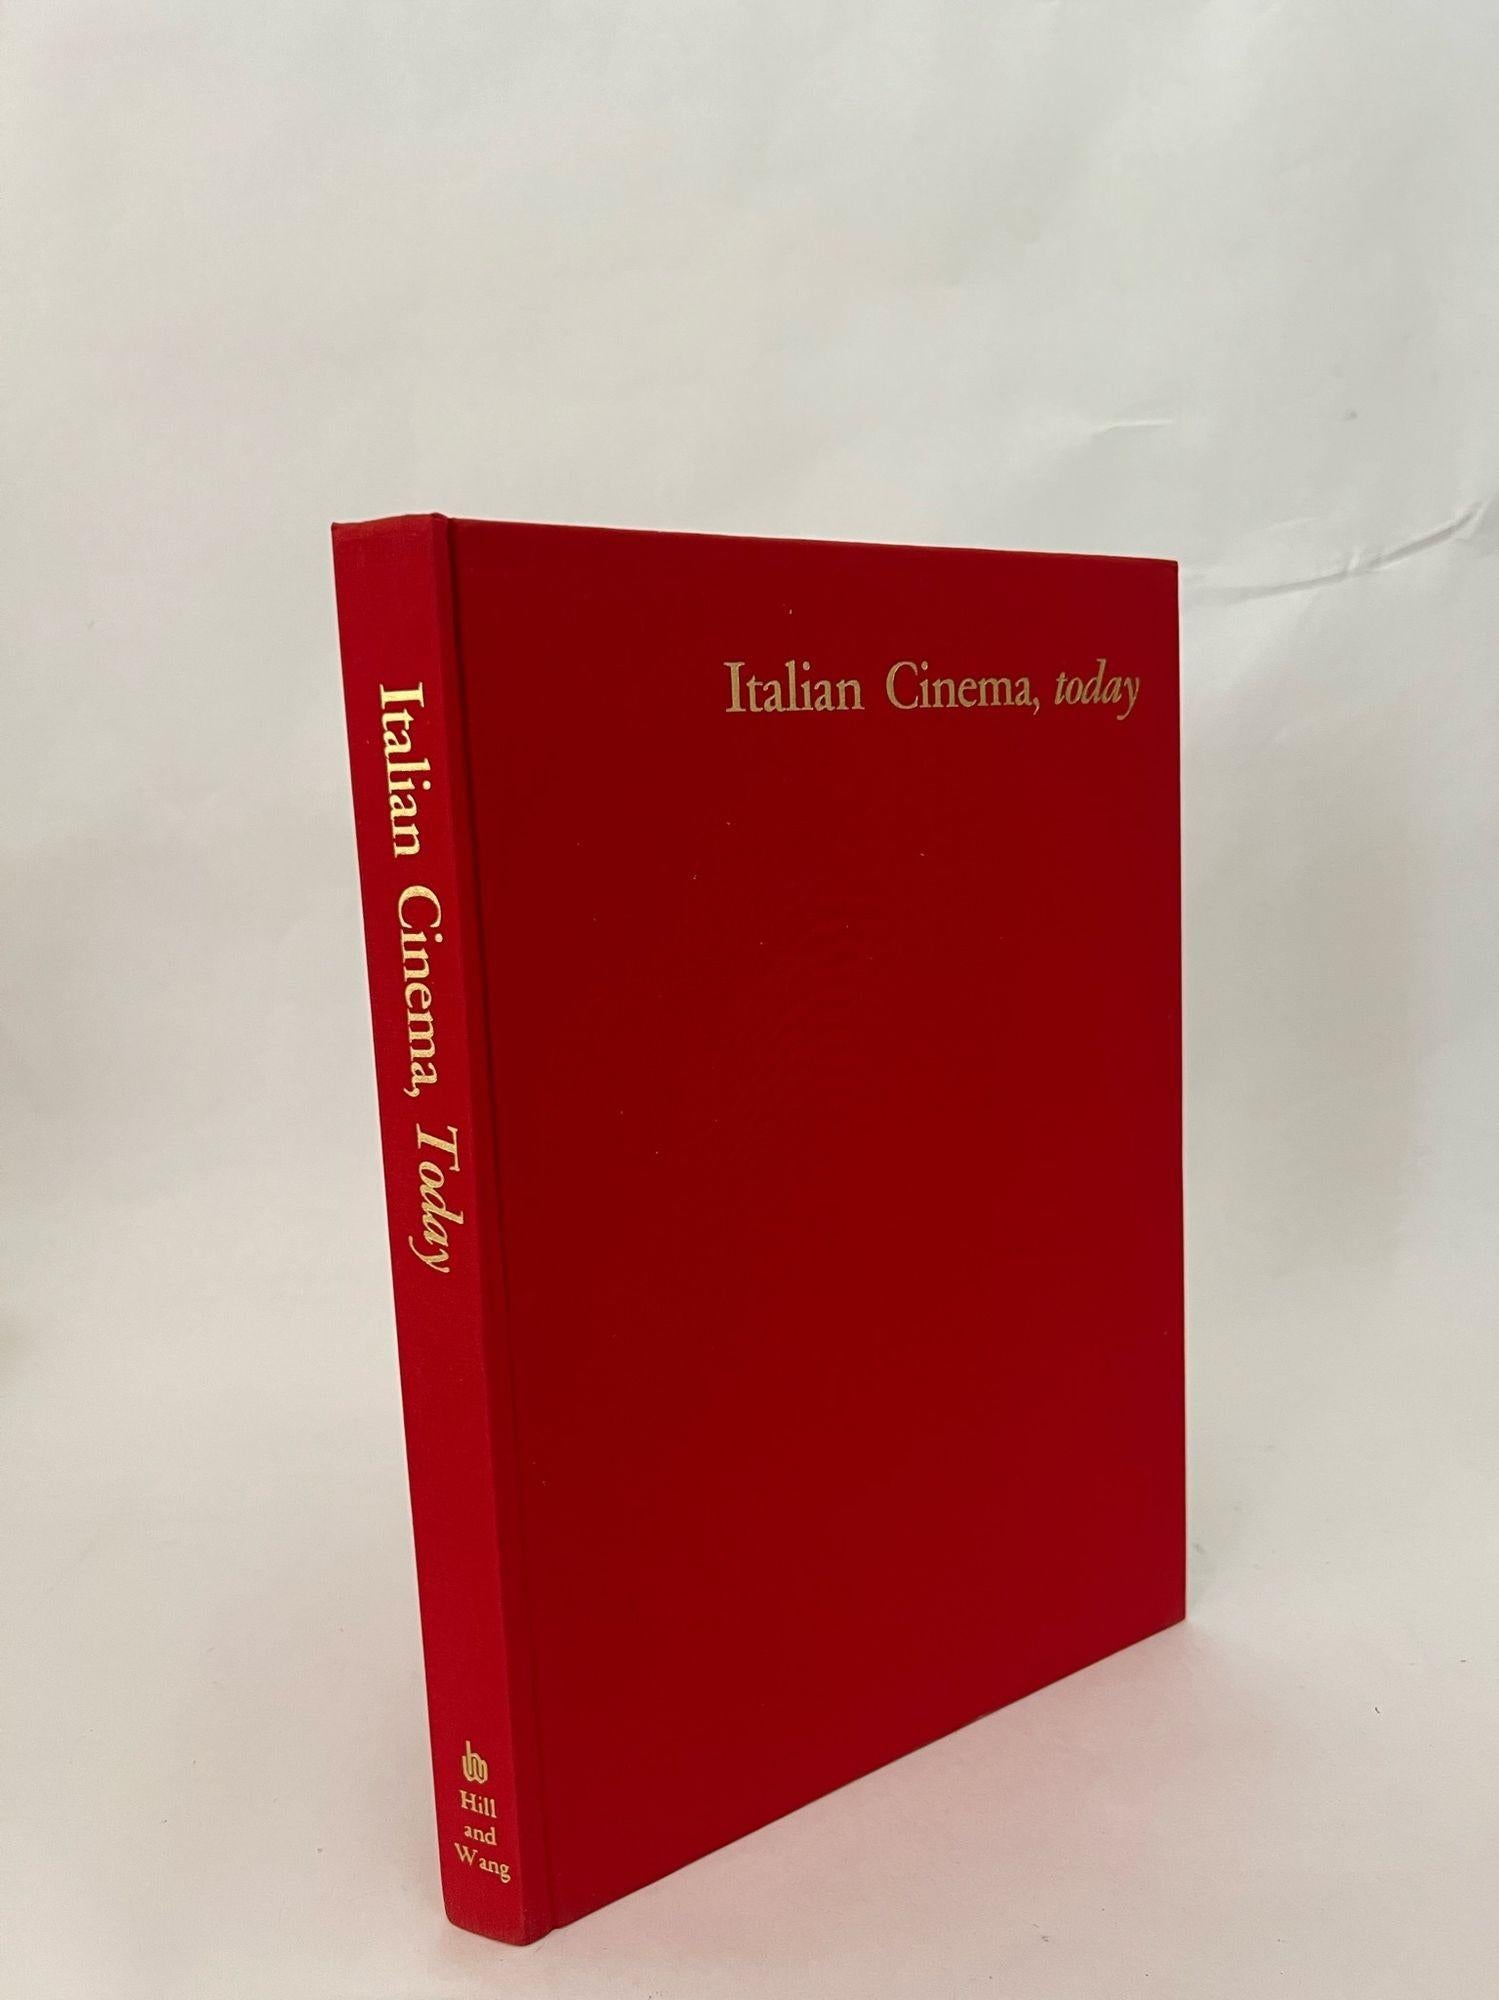 1966 Italian Cinema Today by Gian Luigi Rondi First Edition For Sale 6